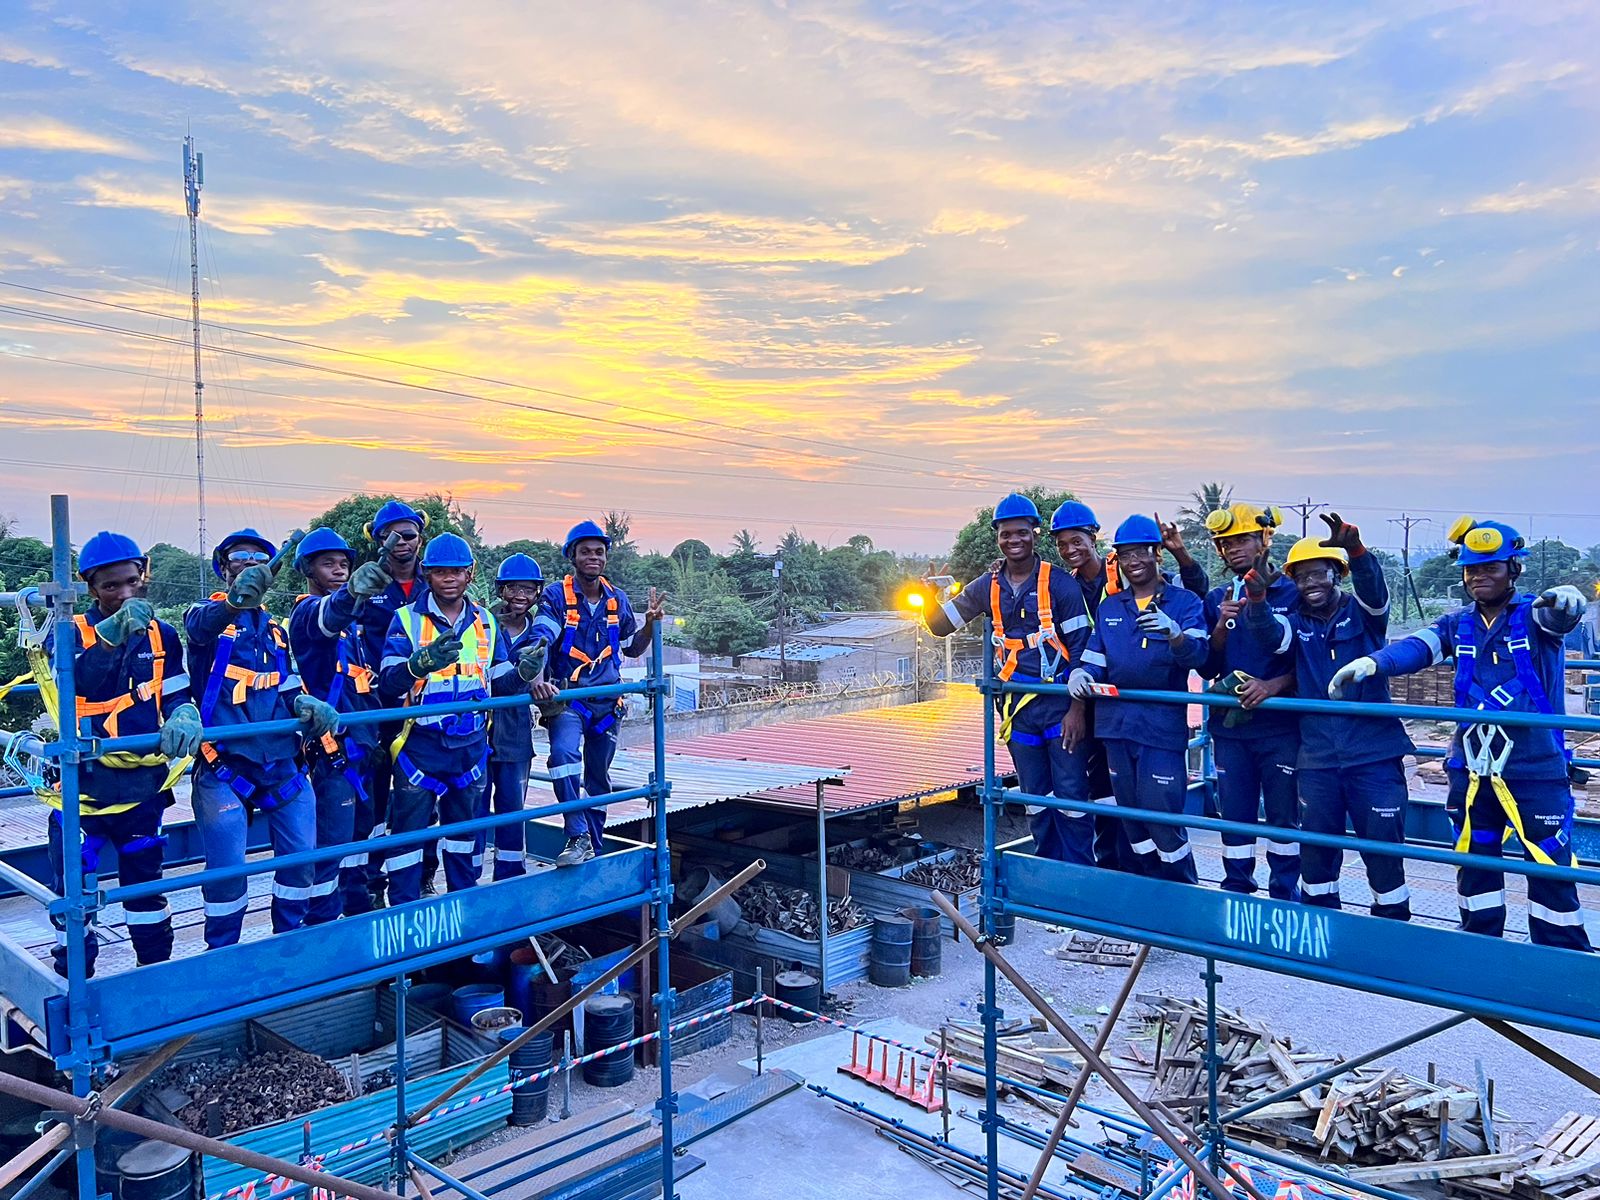 Working at Heights. A team from Uni-Span, proudly trained by TTA, stands confidently on a construction site in Mozambique. Dressed in blue uniforms and safety helmets, they showcase a sense of achievement against a backdrop of a stunning sunset. The site, scattered with equipment and scaffolding, highlights the ongoing development and the collaboration between TTA and Uni-Span.